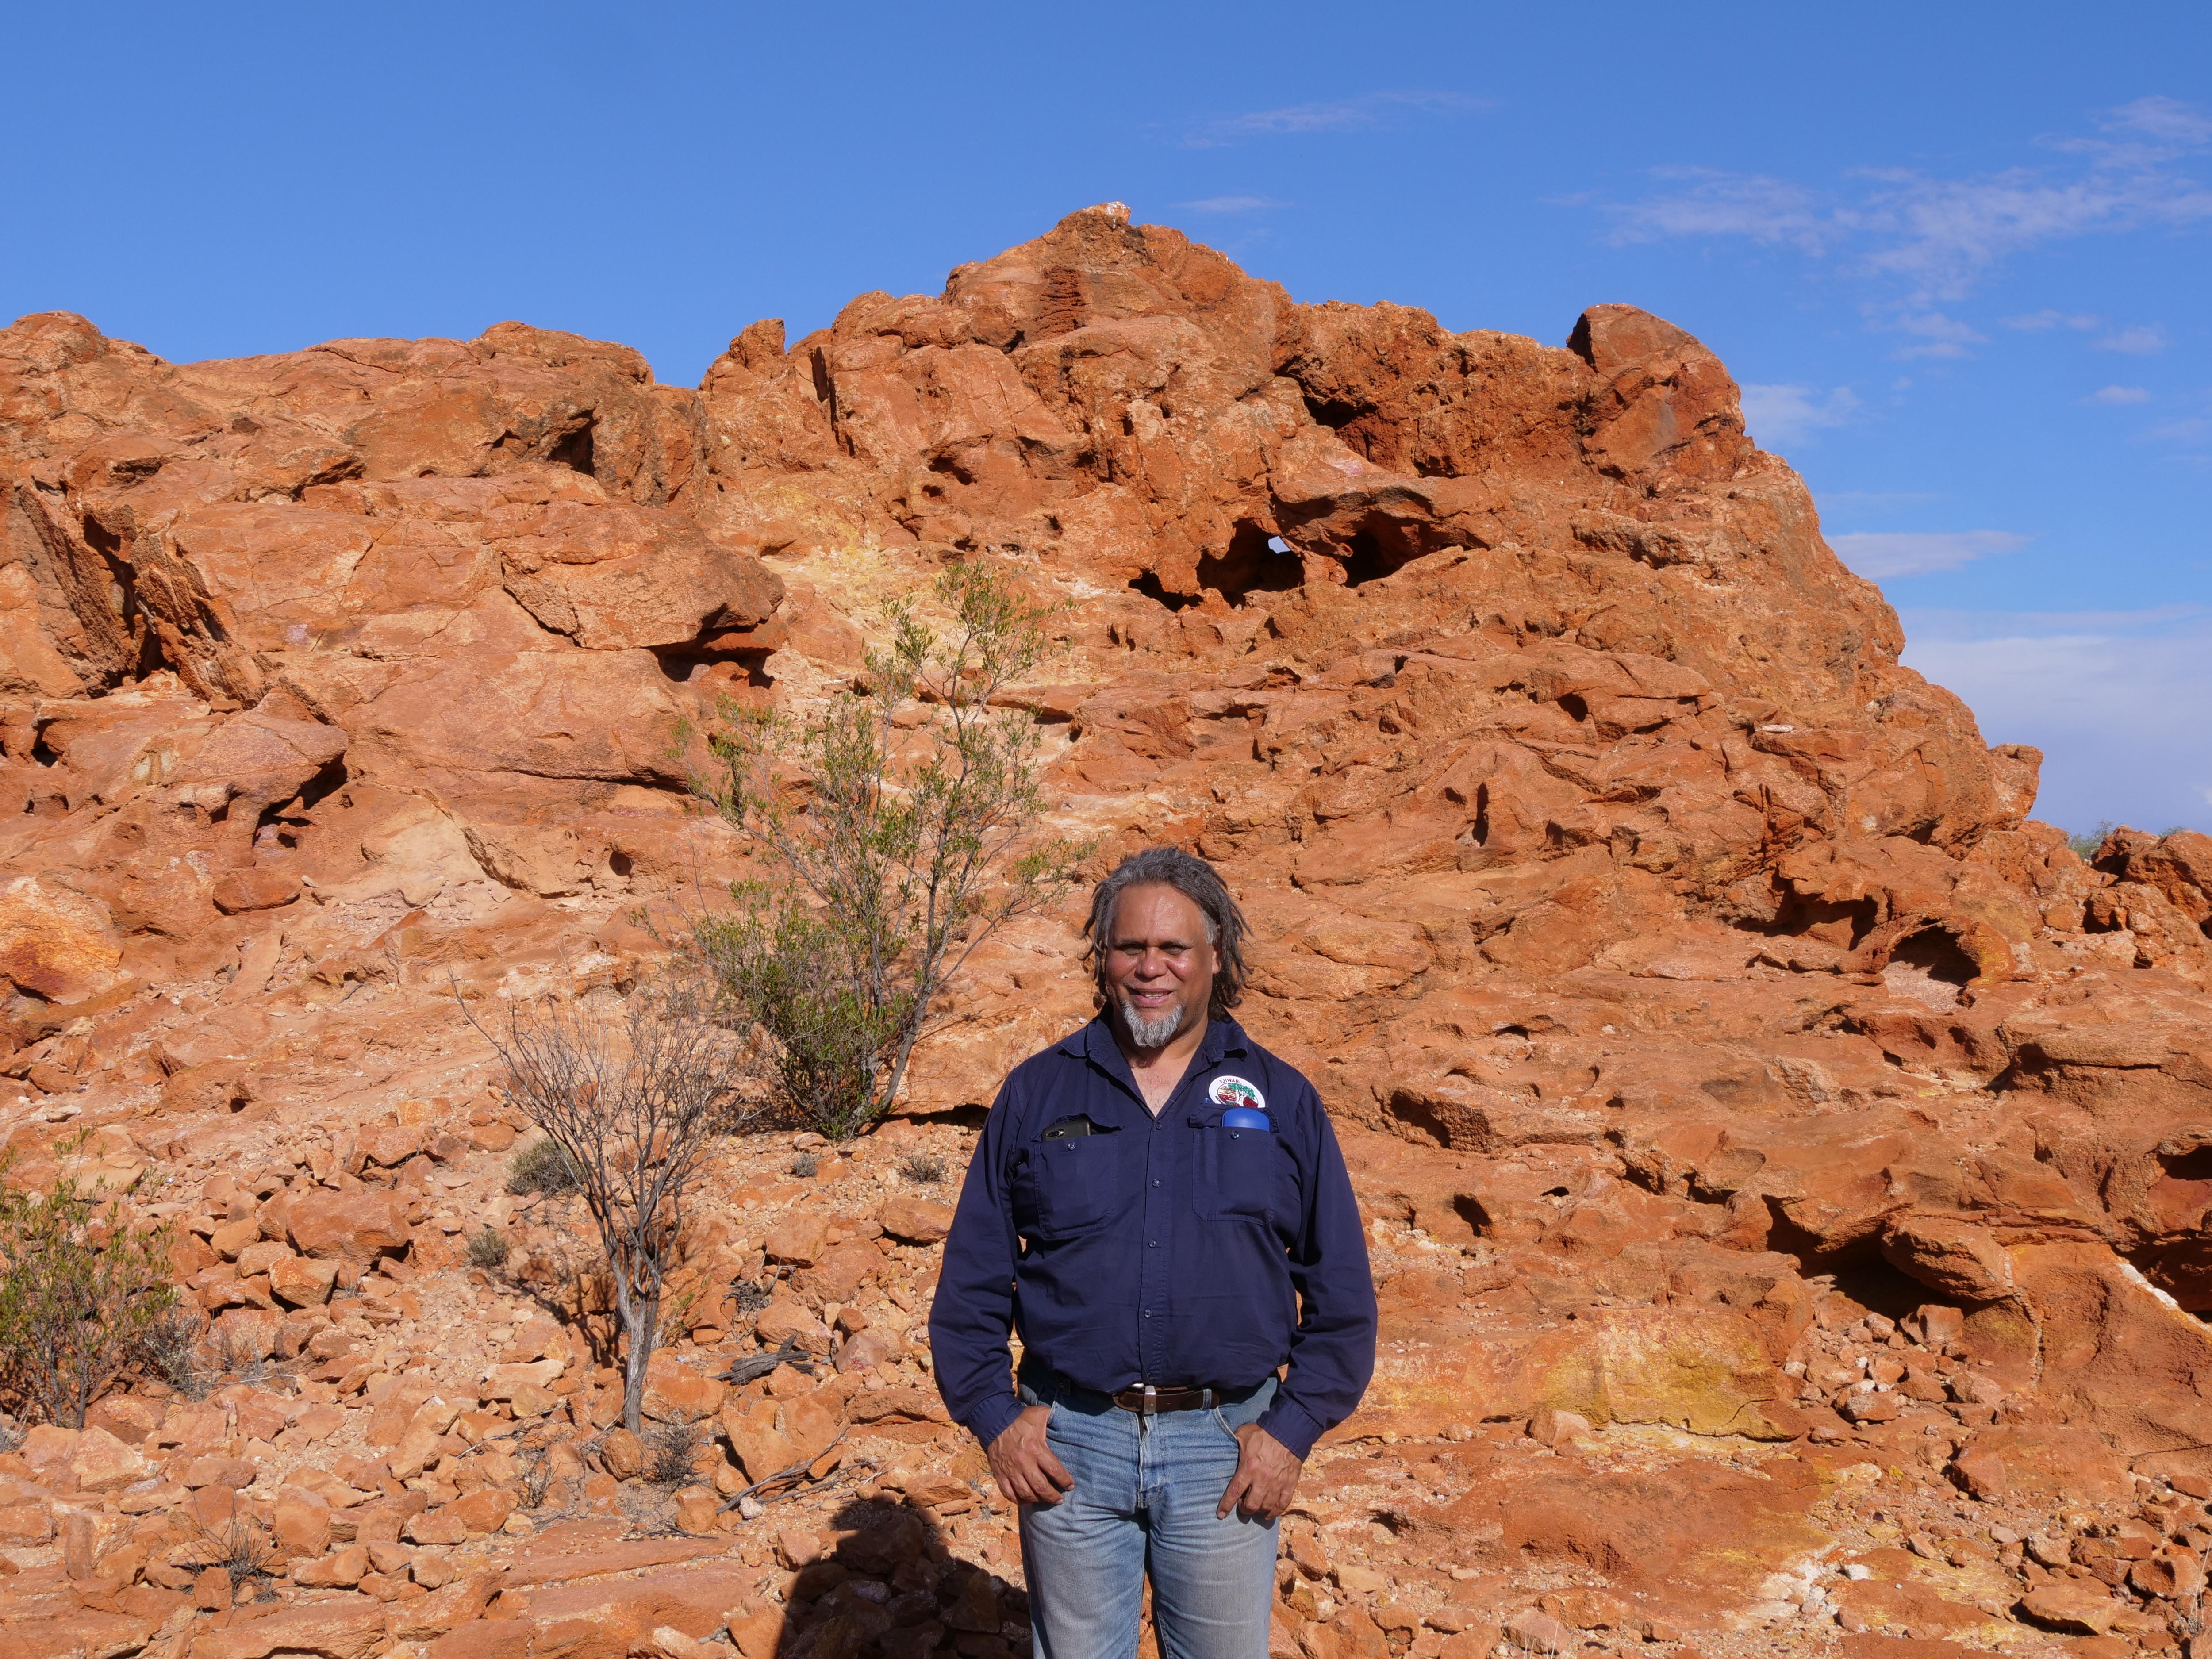 A man in blue shirt stands in front of a rocky outcrop in WA